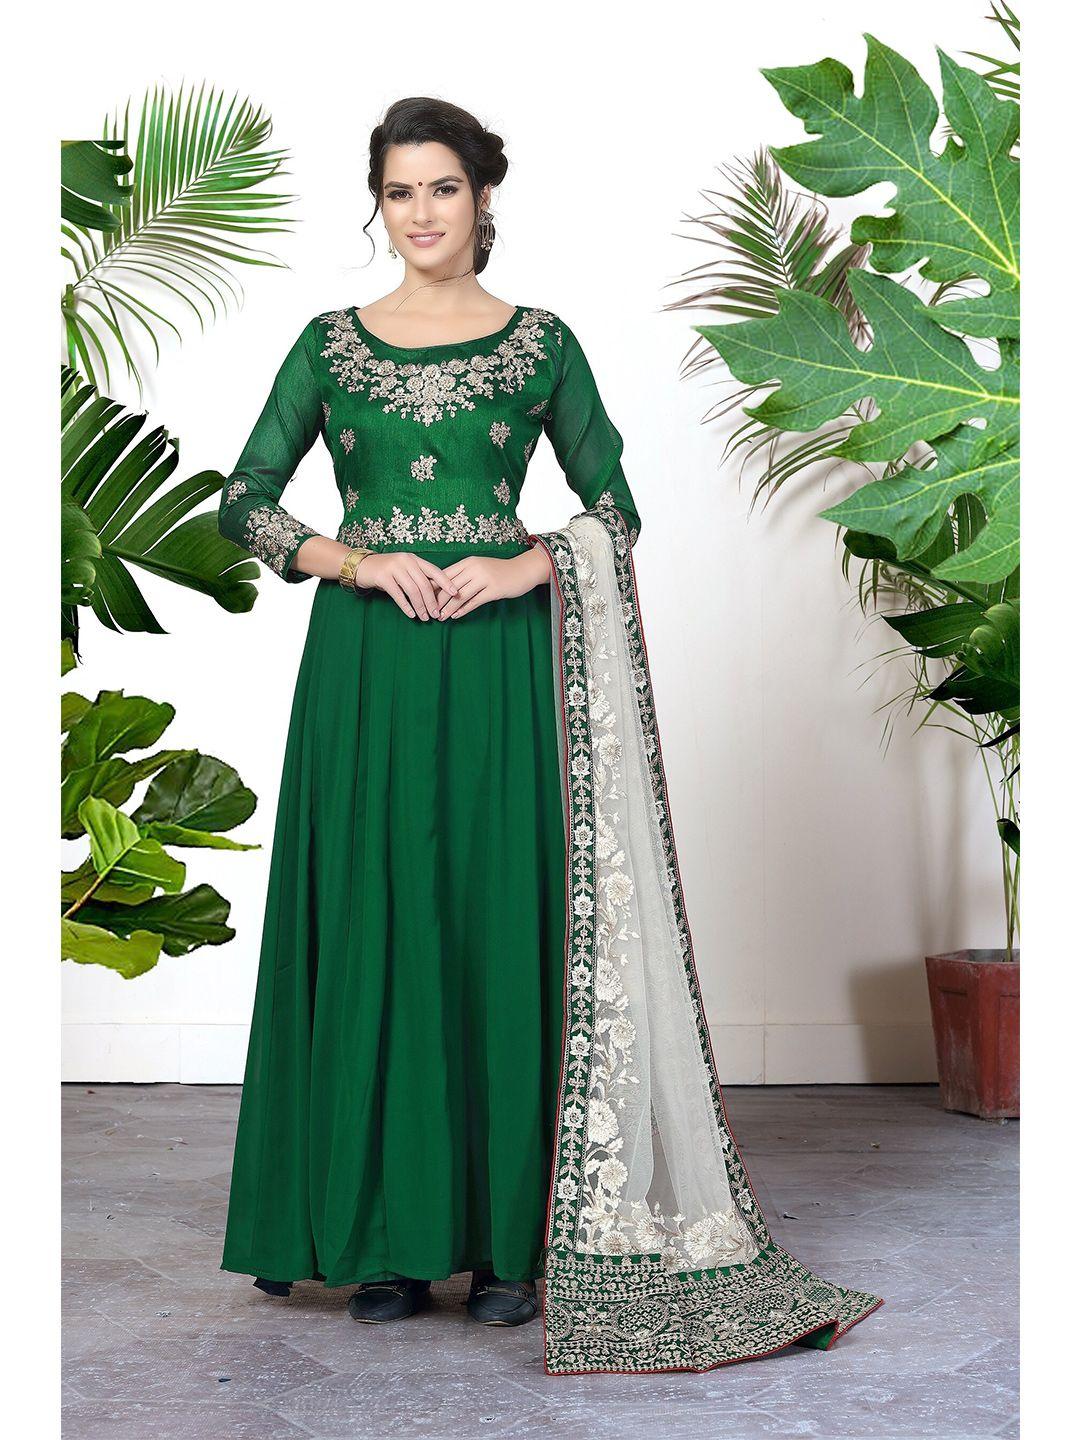 divine international trading co green & white embroidered unstitched dress material